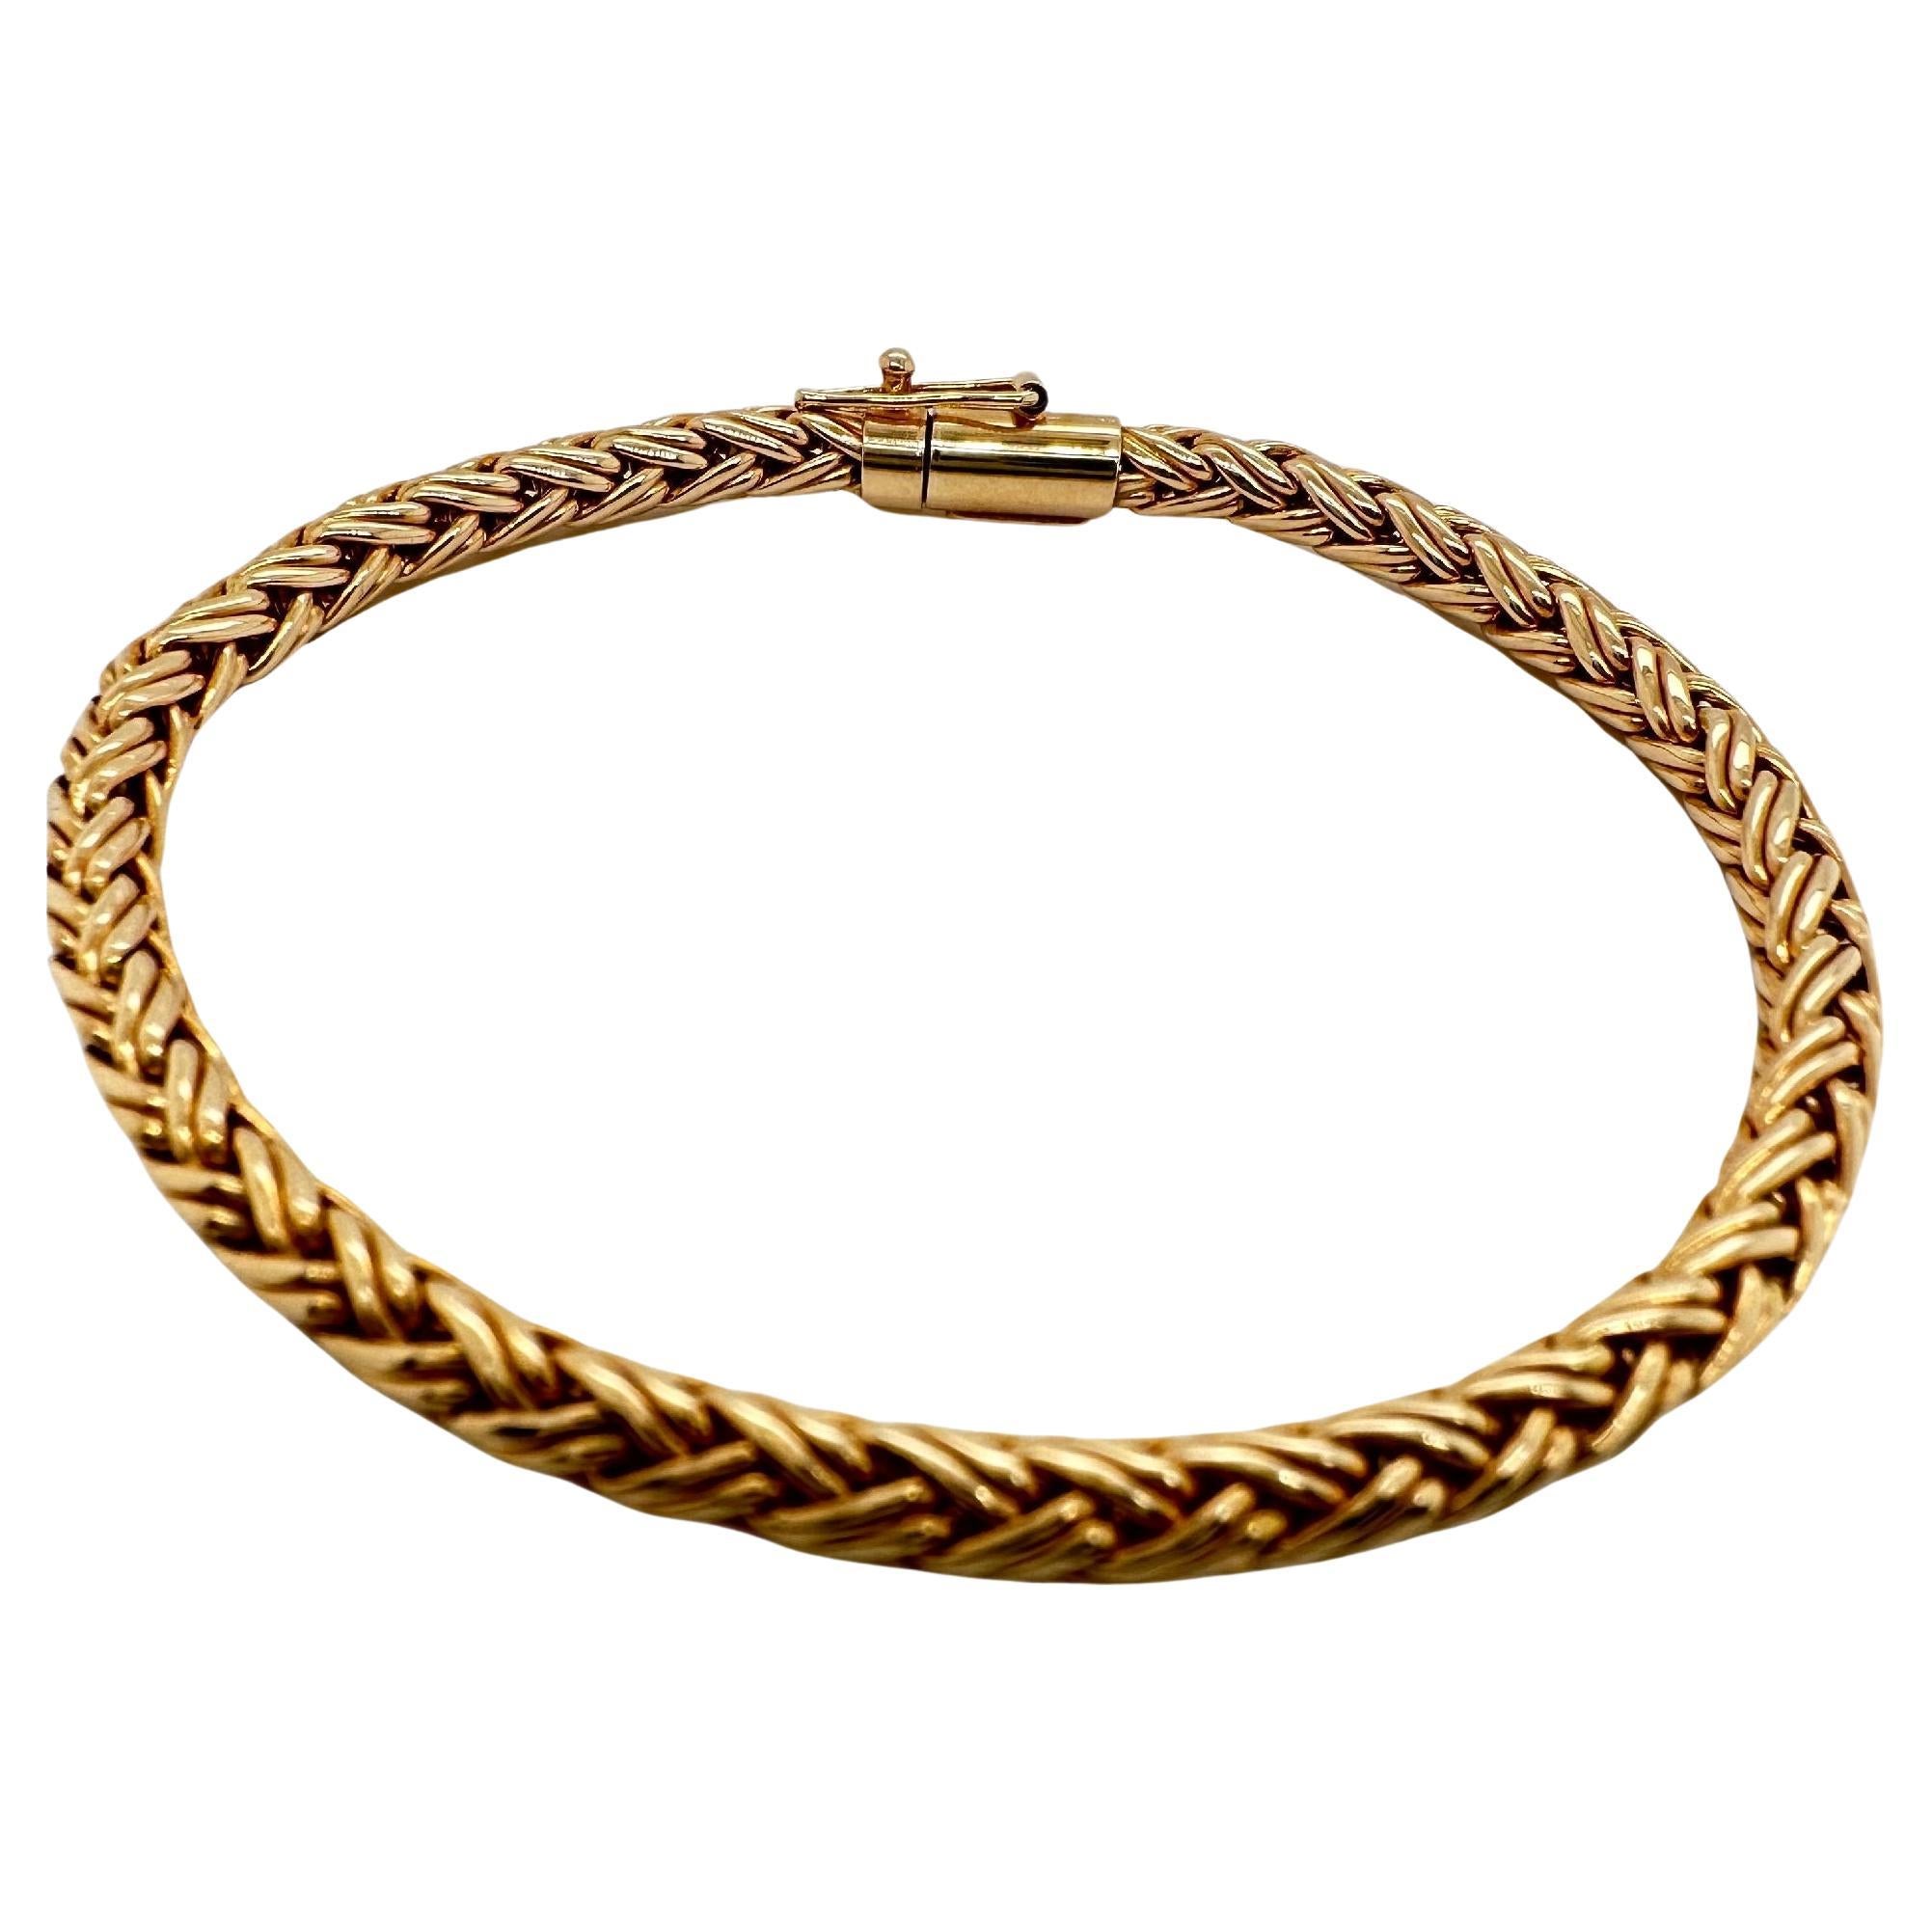 Tiffany & Co. Wheat Braided Rope Bracelet in 14k Yellow Gold